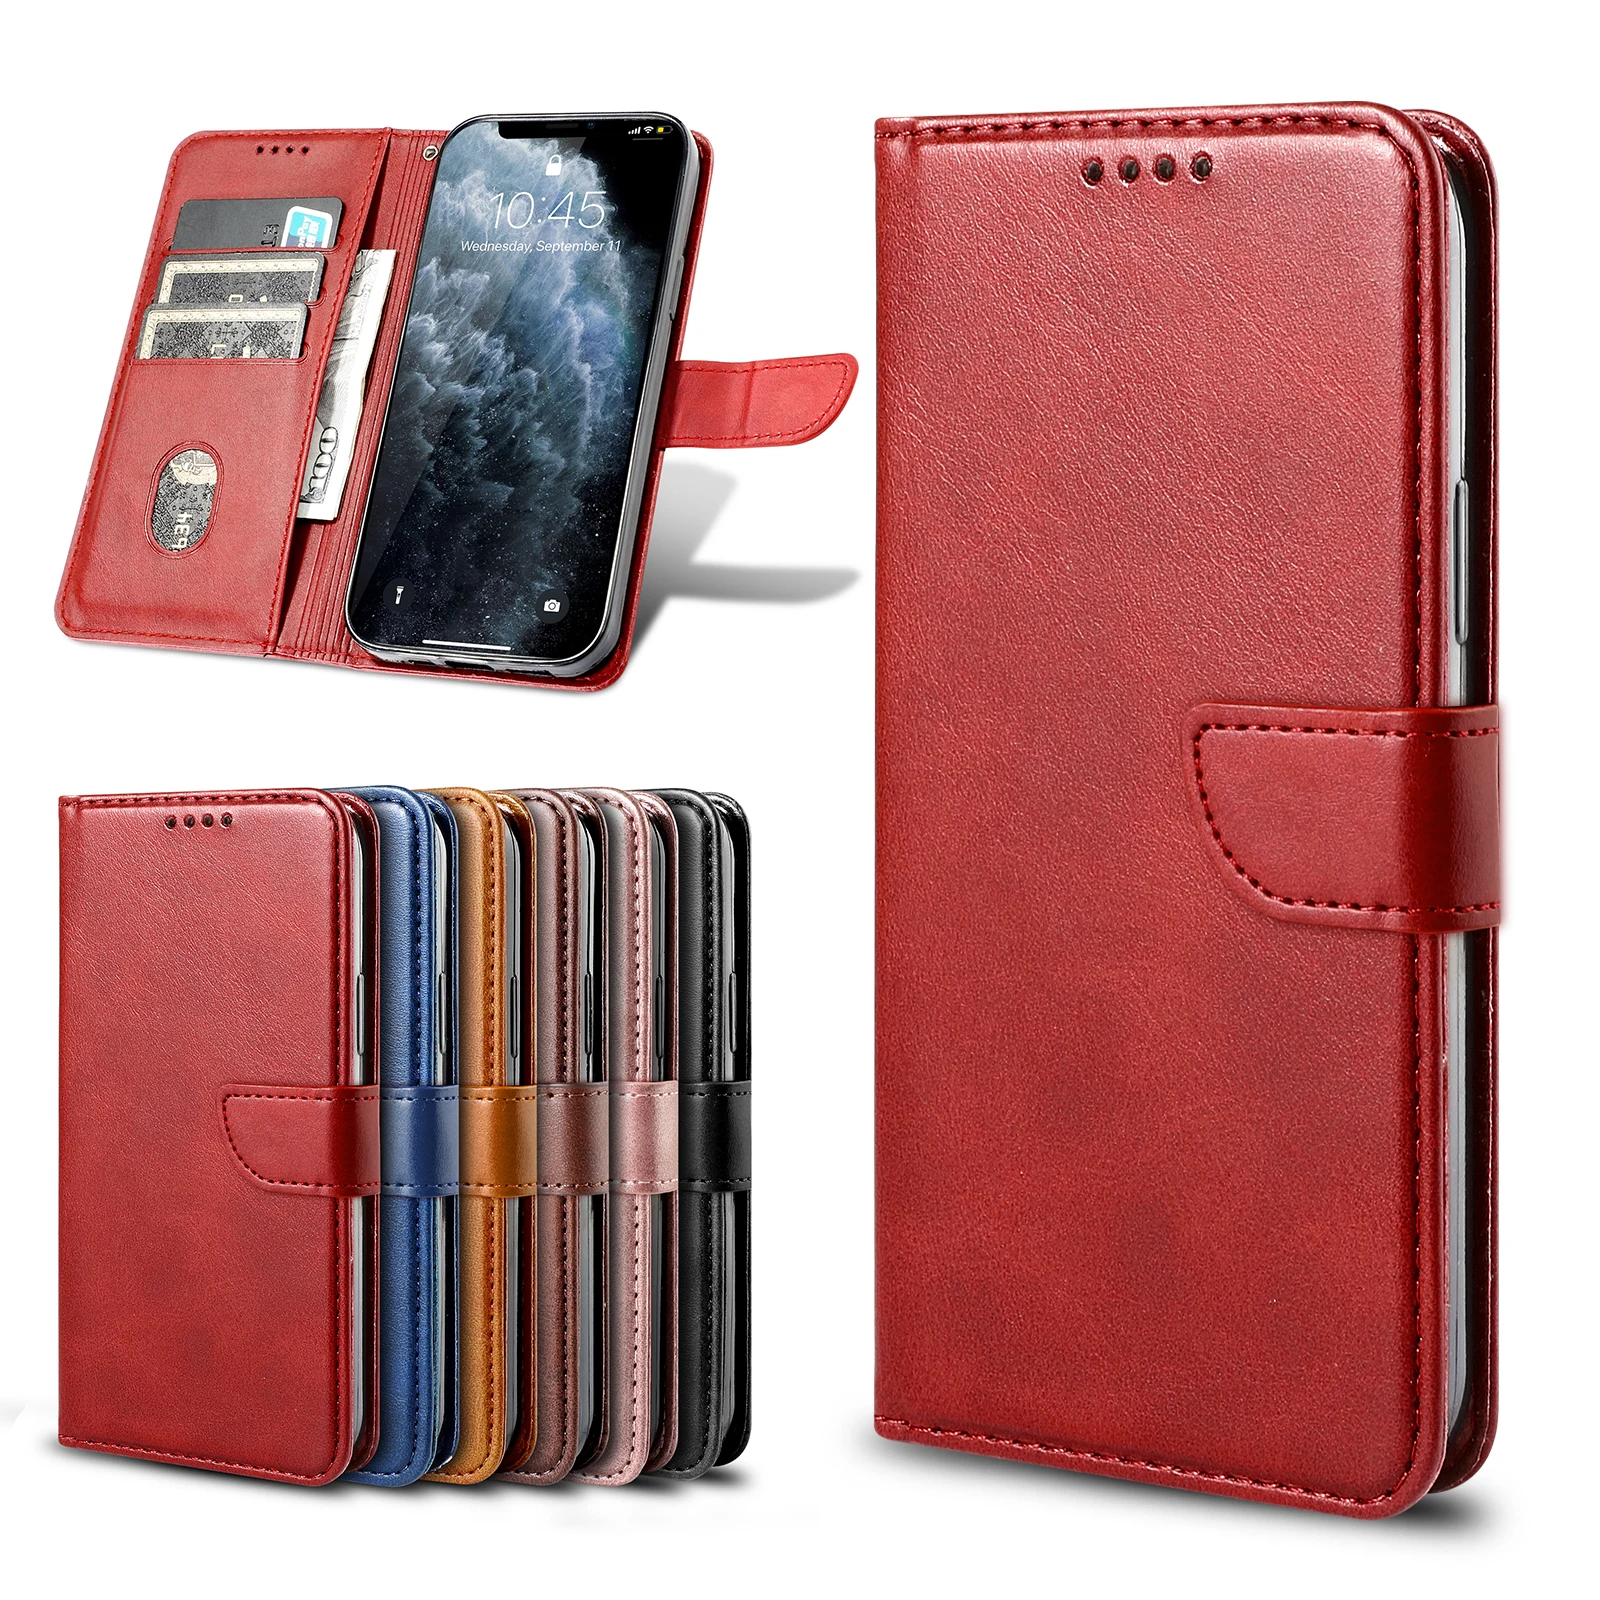 

Leather case For Sony Xperia XZ1 XZ Premium XZ2 Flip case card holder Holster Magnetic attraction Cover Case Wallet Case